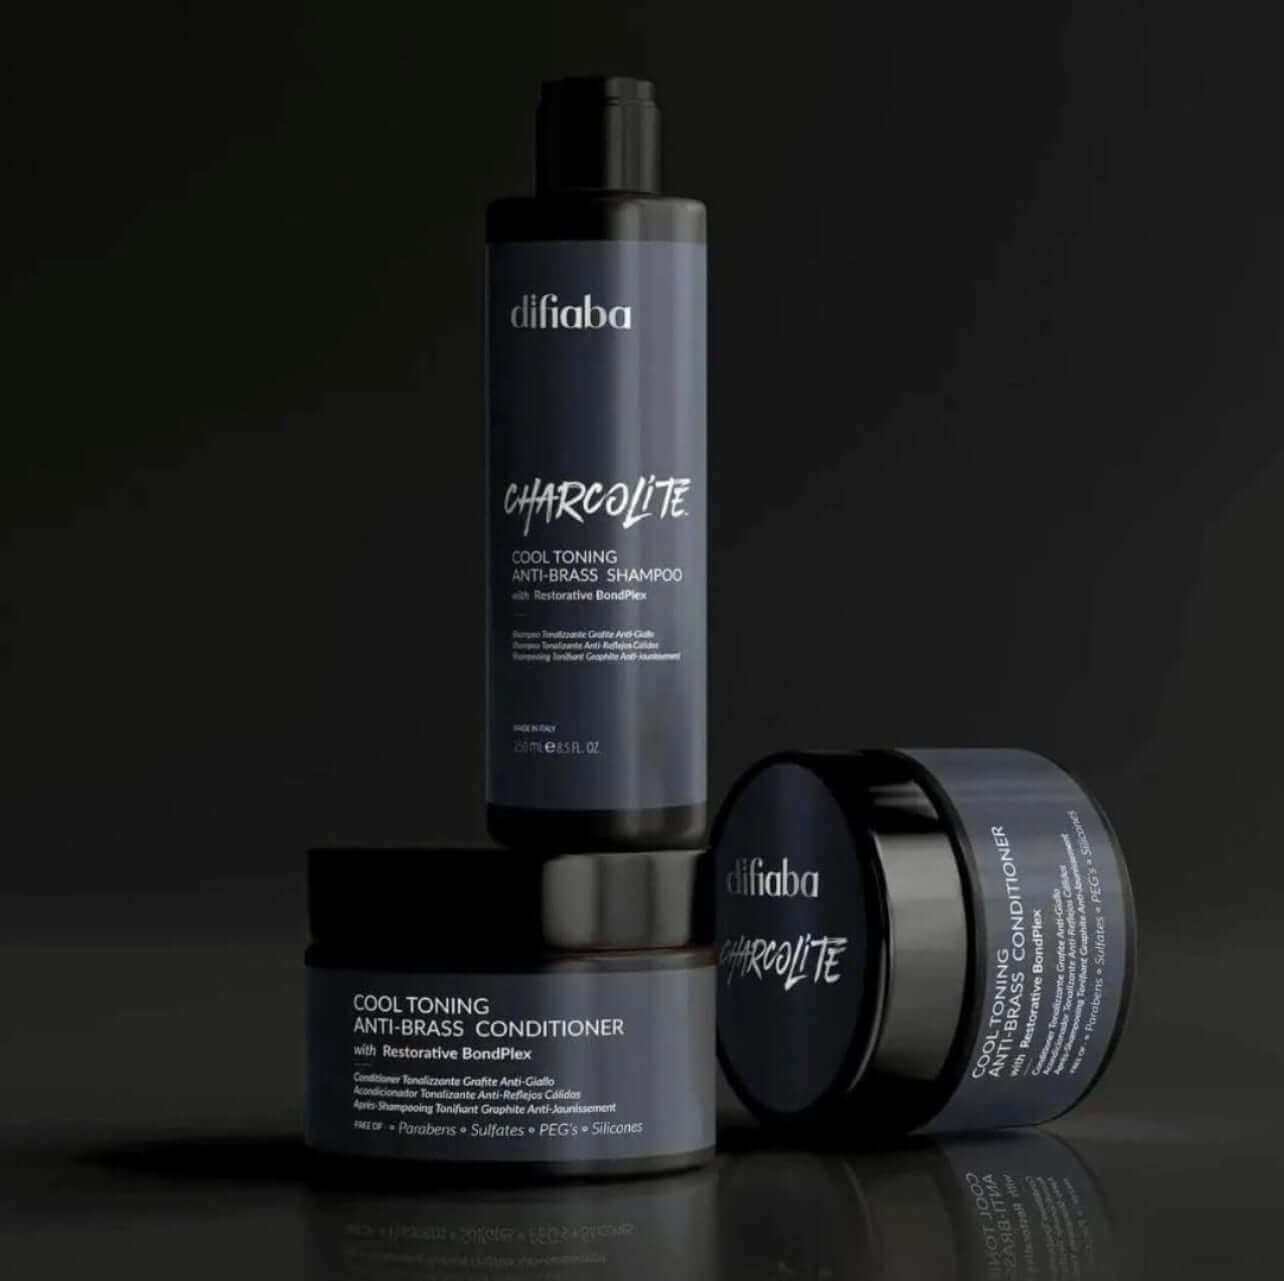 DIFIABA Charcolite Cool Toning Anti-Brass Conditioner a Conditioner from Simply Colour Hair Salon Studio & Online Store